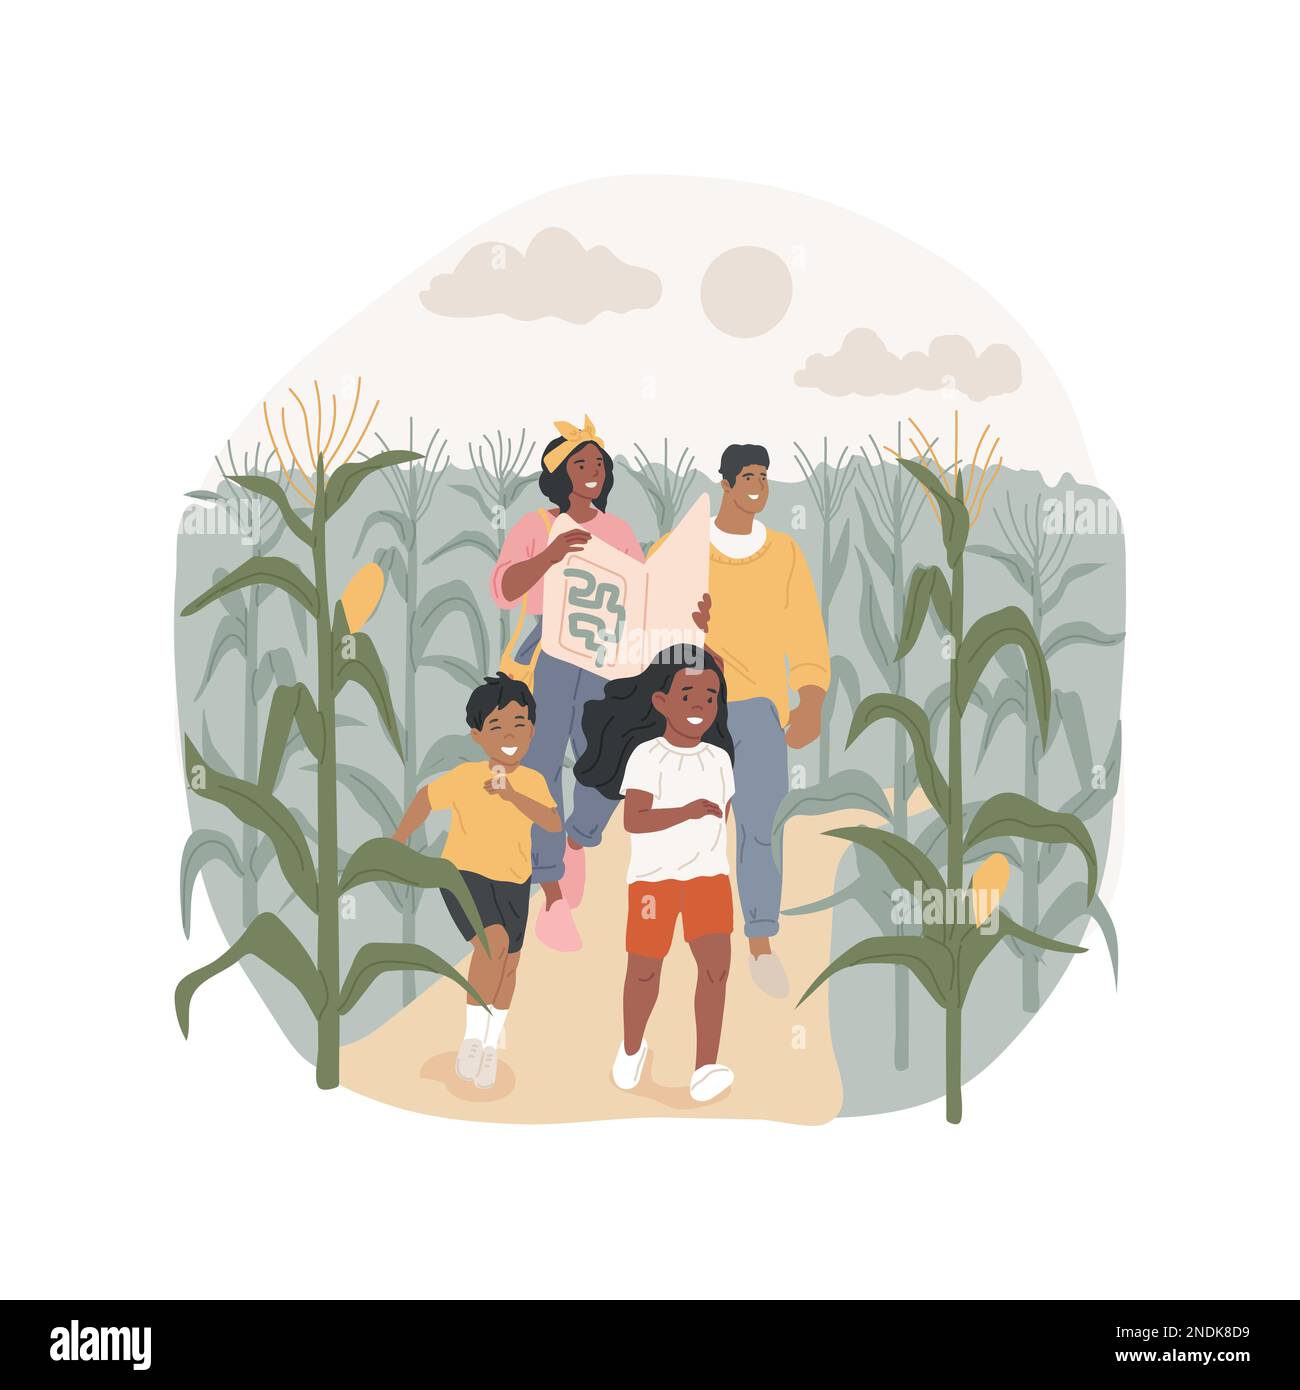 Corn maze isolated cartoon vector illustration. Family leisure time, labyrinth in a field, walking together in a corn maze, outdoor activity for children, one day farm trip vector cartoon. Stock Vector